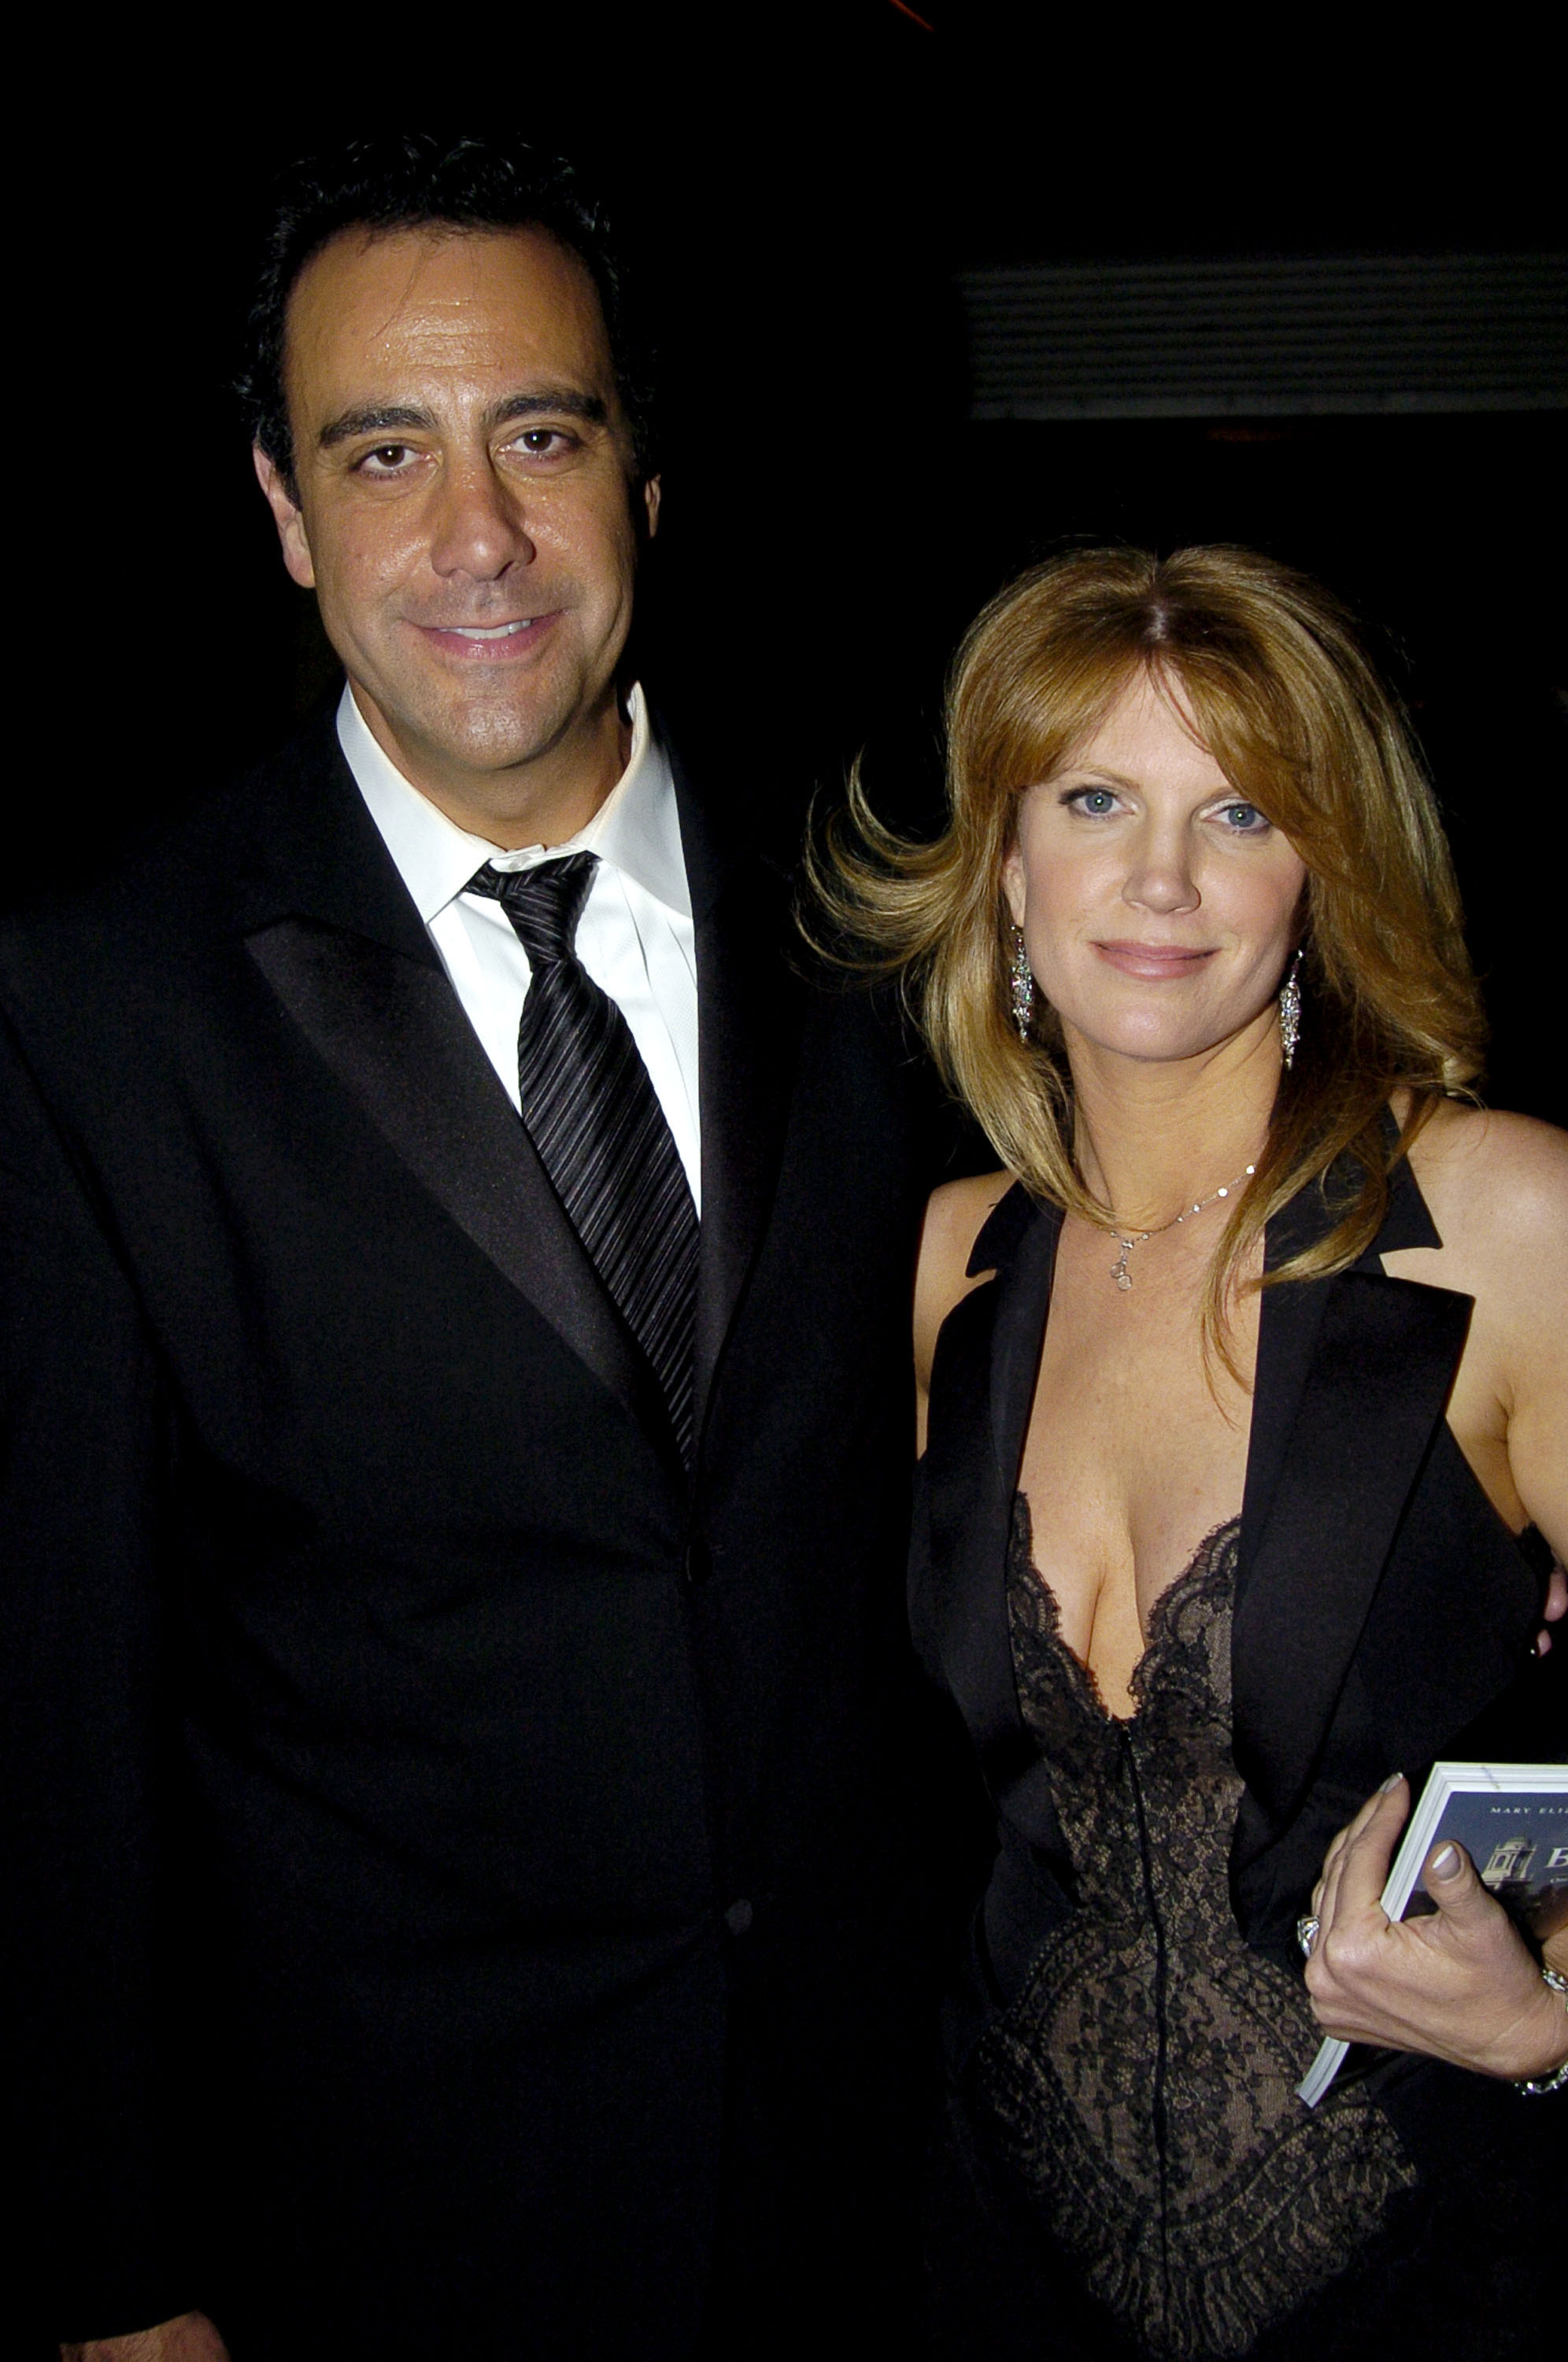 Brad Garrett and Jill Diven at The 56th Annual Primetime Emmy Awards on September 19, 2004, in Los Angeles, California. | Source: Getty Images